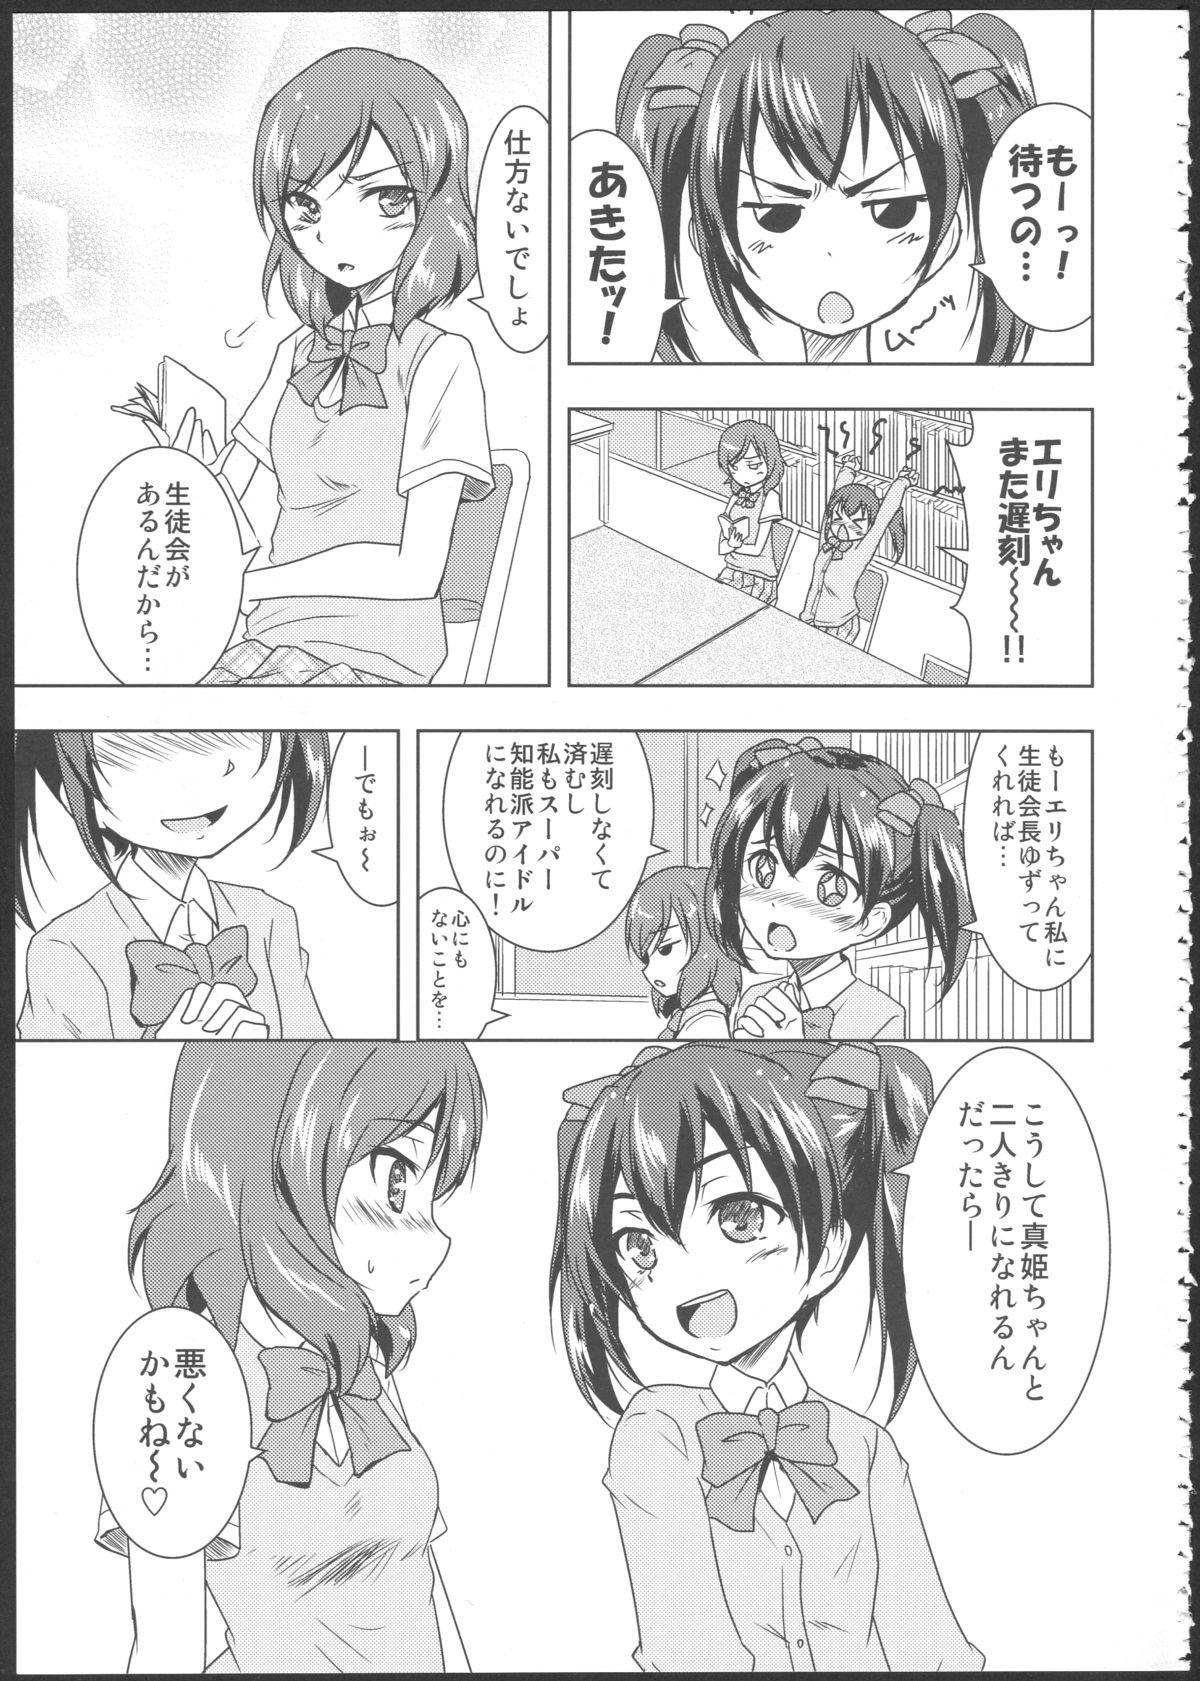 Friends Princess and Panther! - Love live Famosa - Page 2